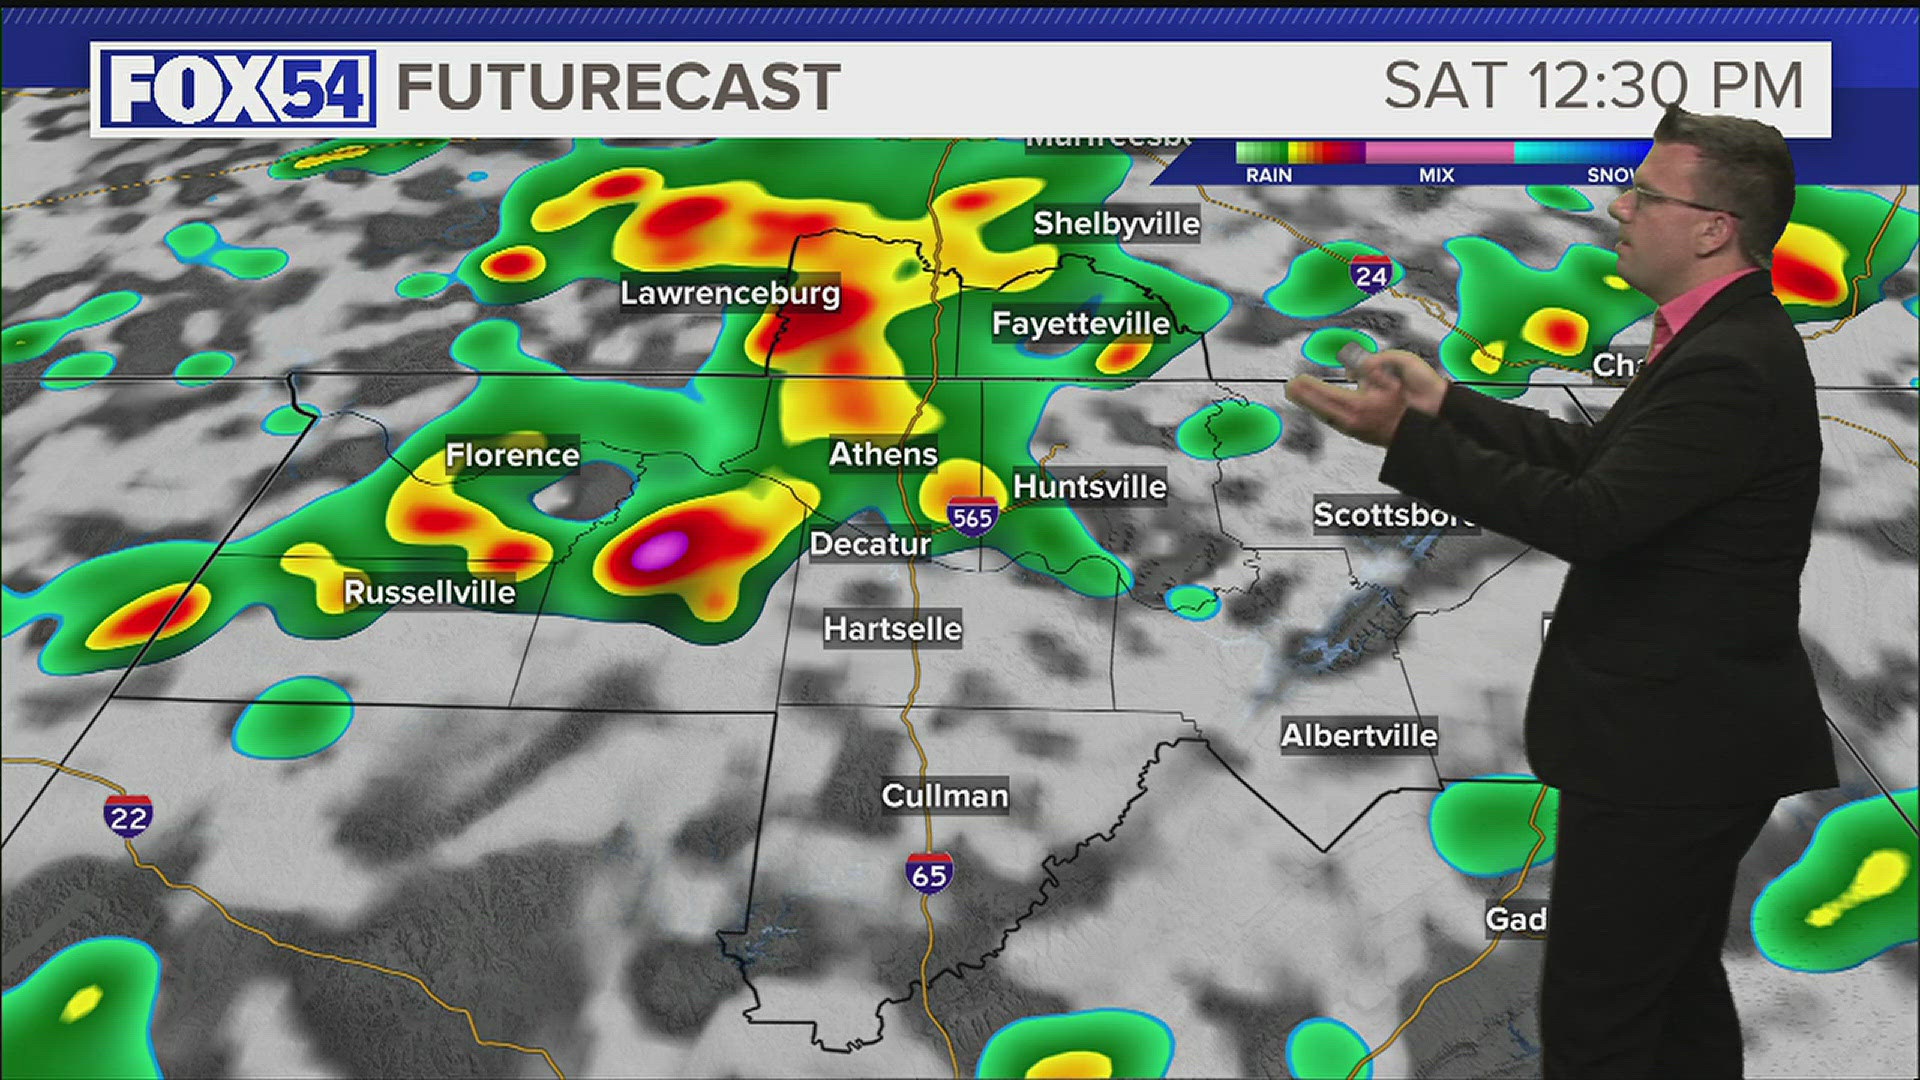 Scattered showers and thunderstorms will be with us through at least part of the weekend.